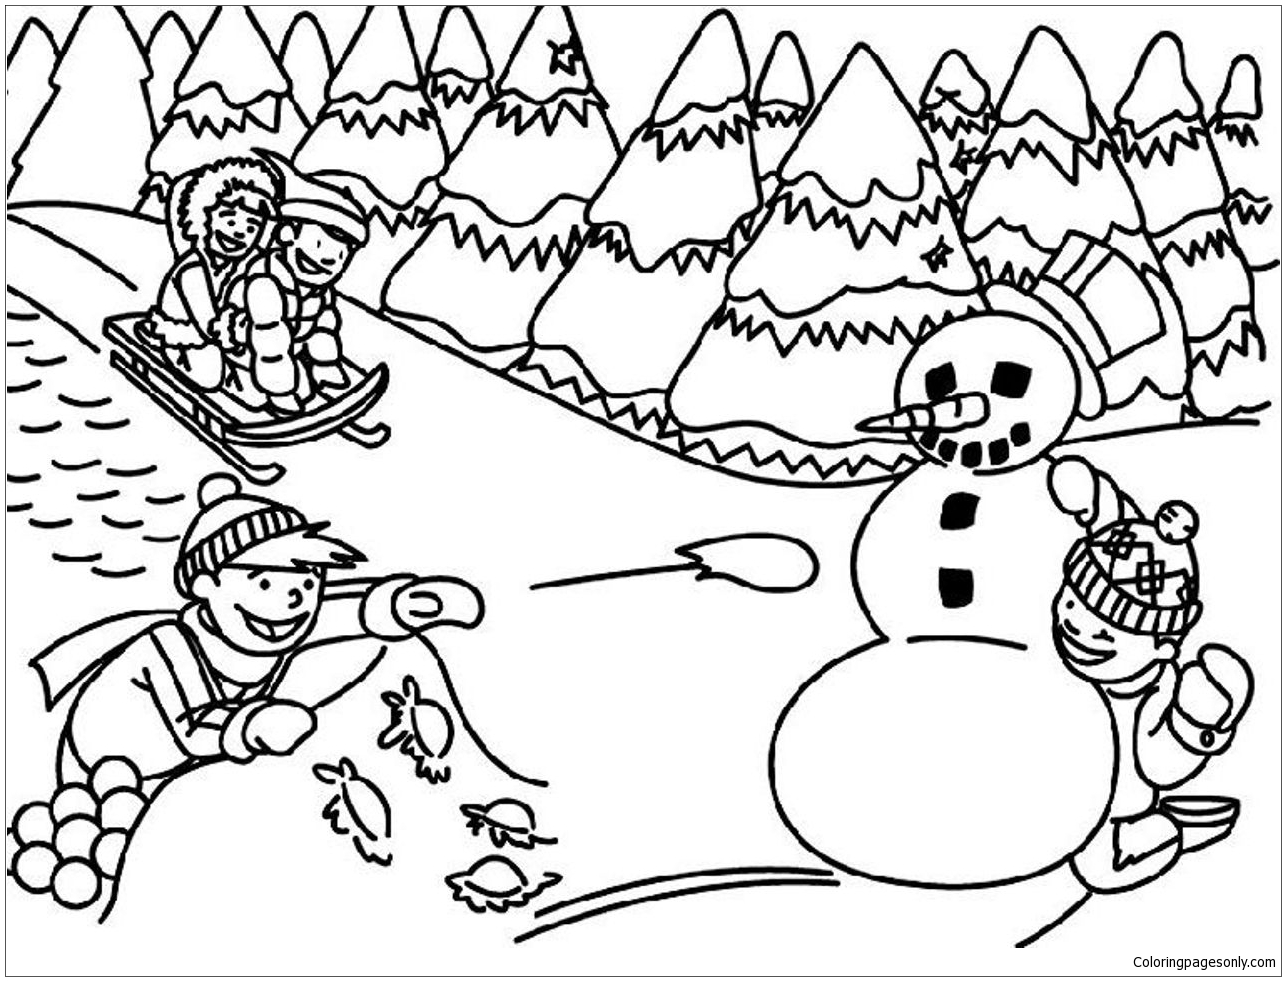 Best Kids Playing In Winter Coloring Page - Free Coloring ...